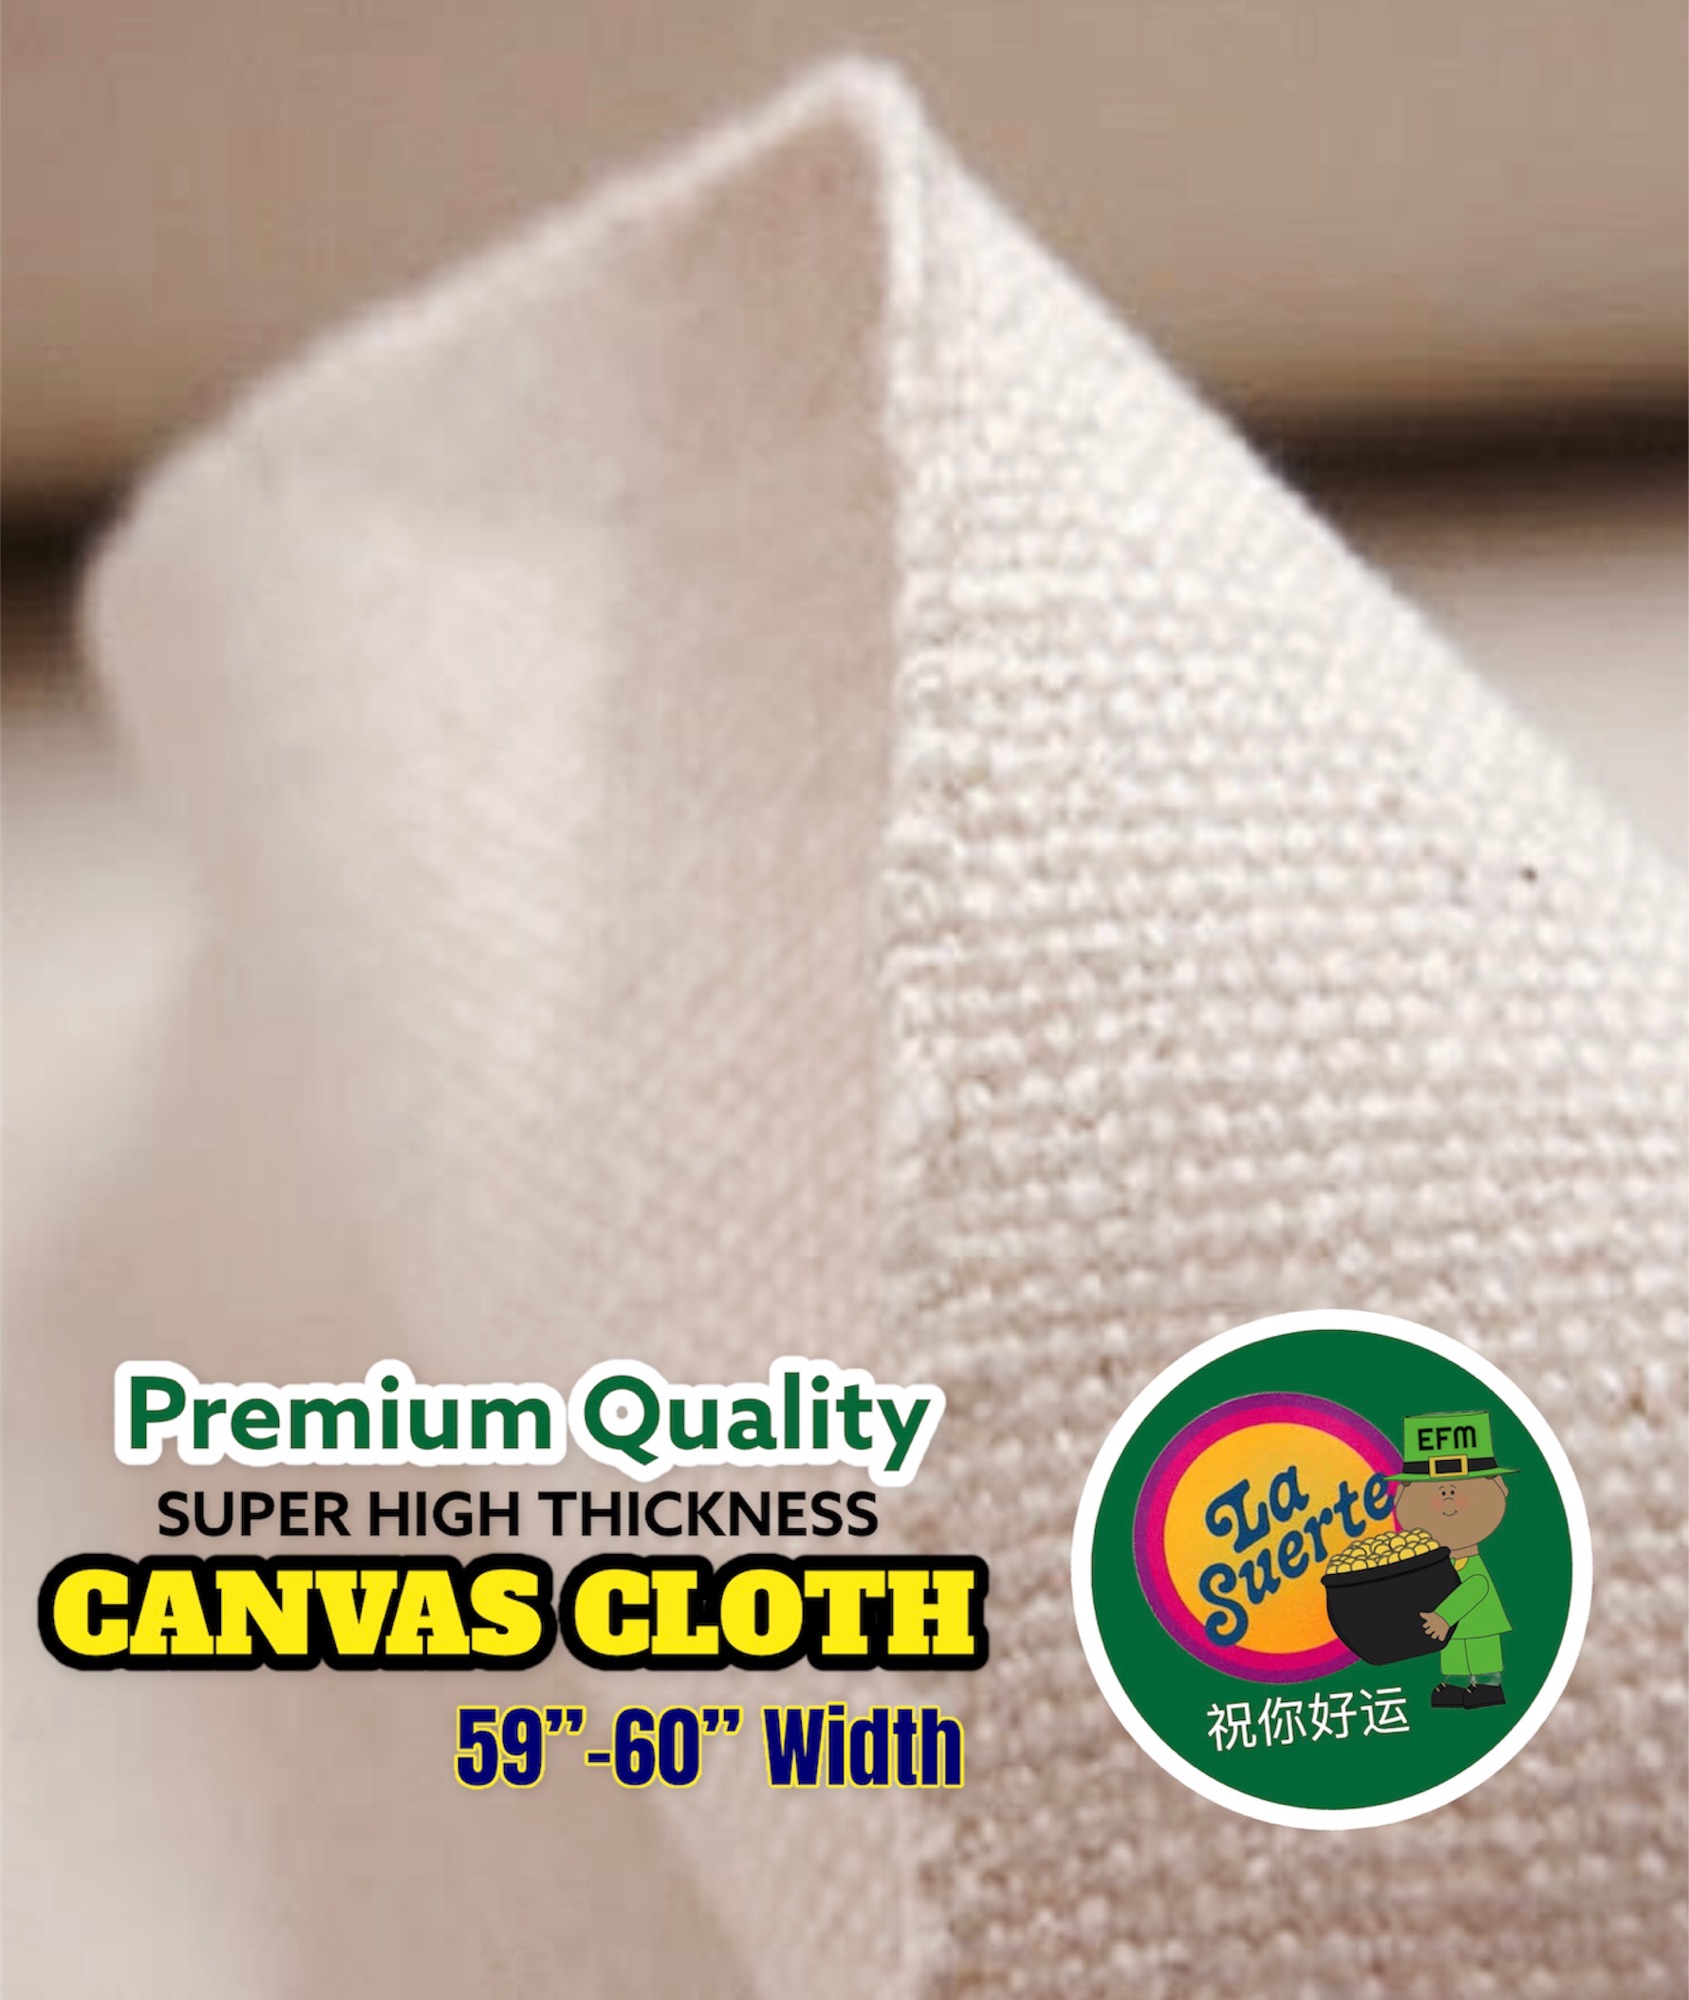 High thickness Canvas Fabric by Catcha Cloth, 59"-60" width